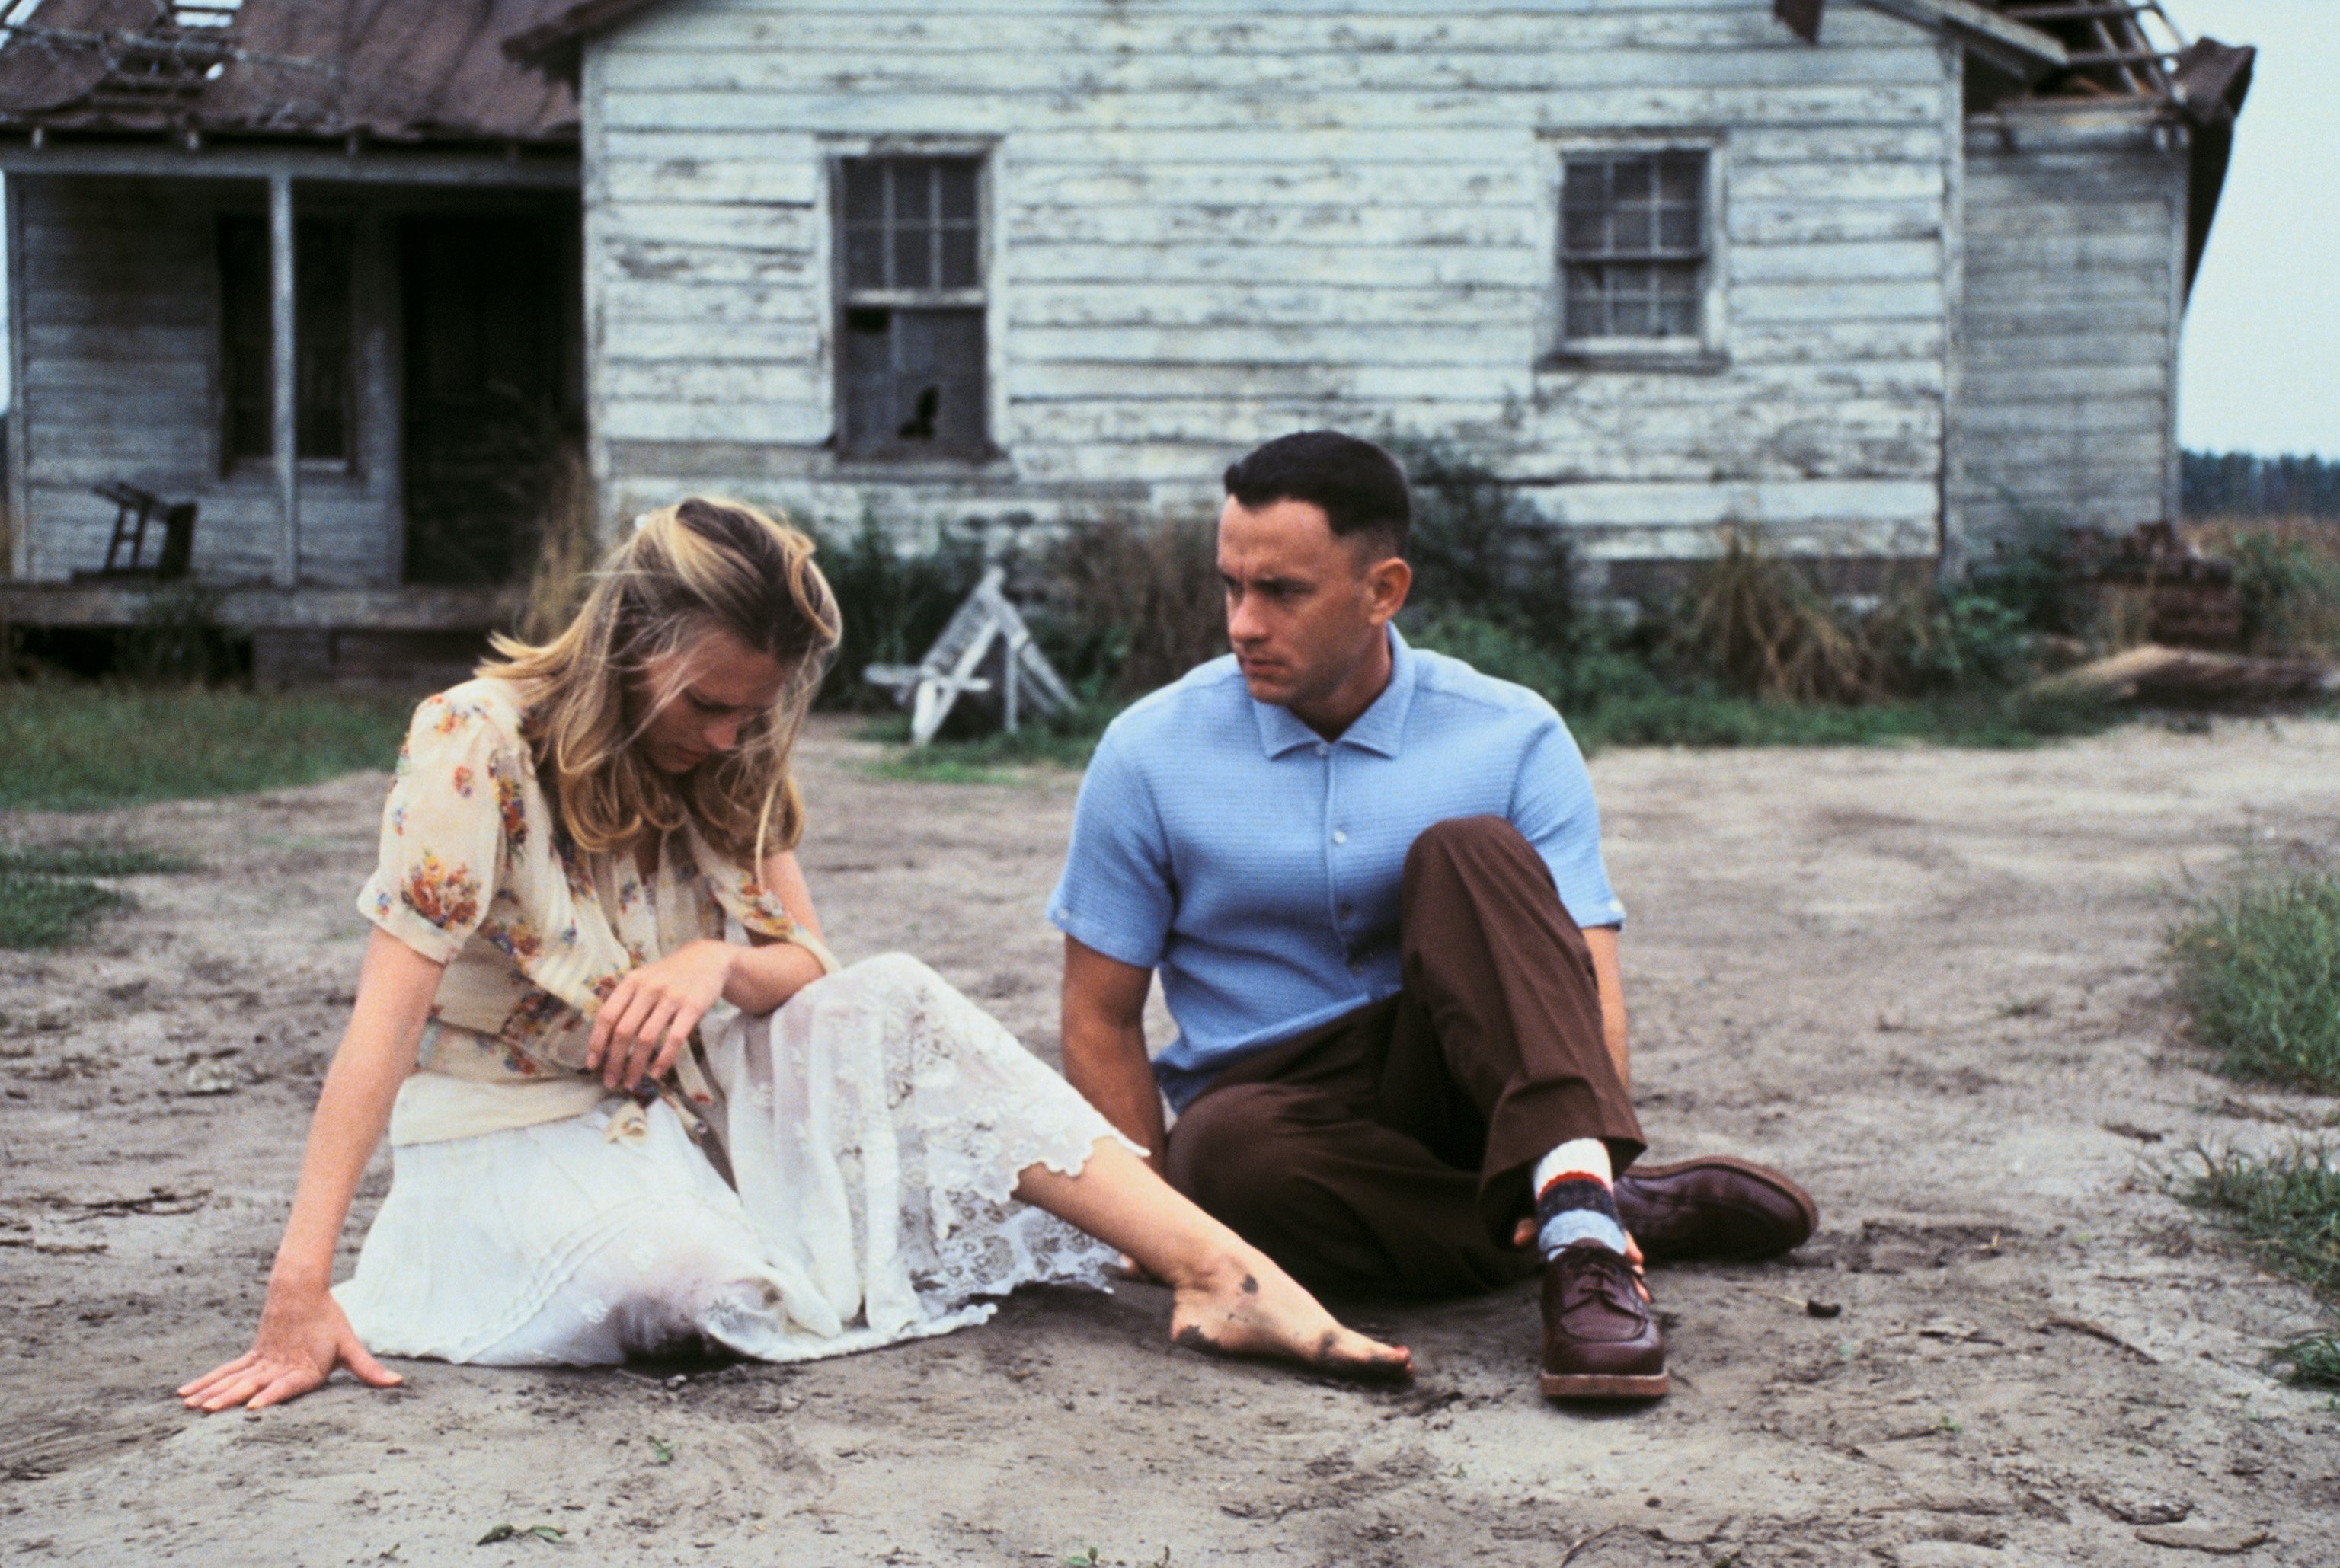 Jenny and Forrest Gump sit in the dirt